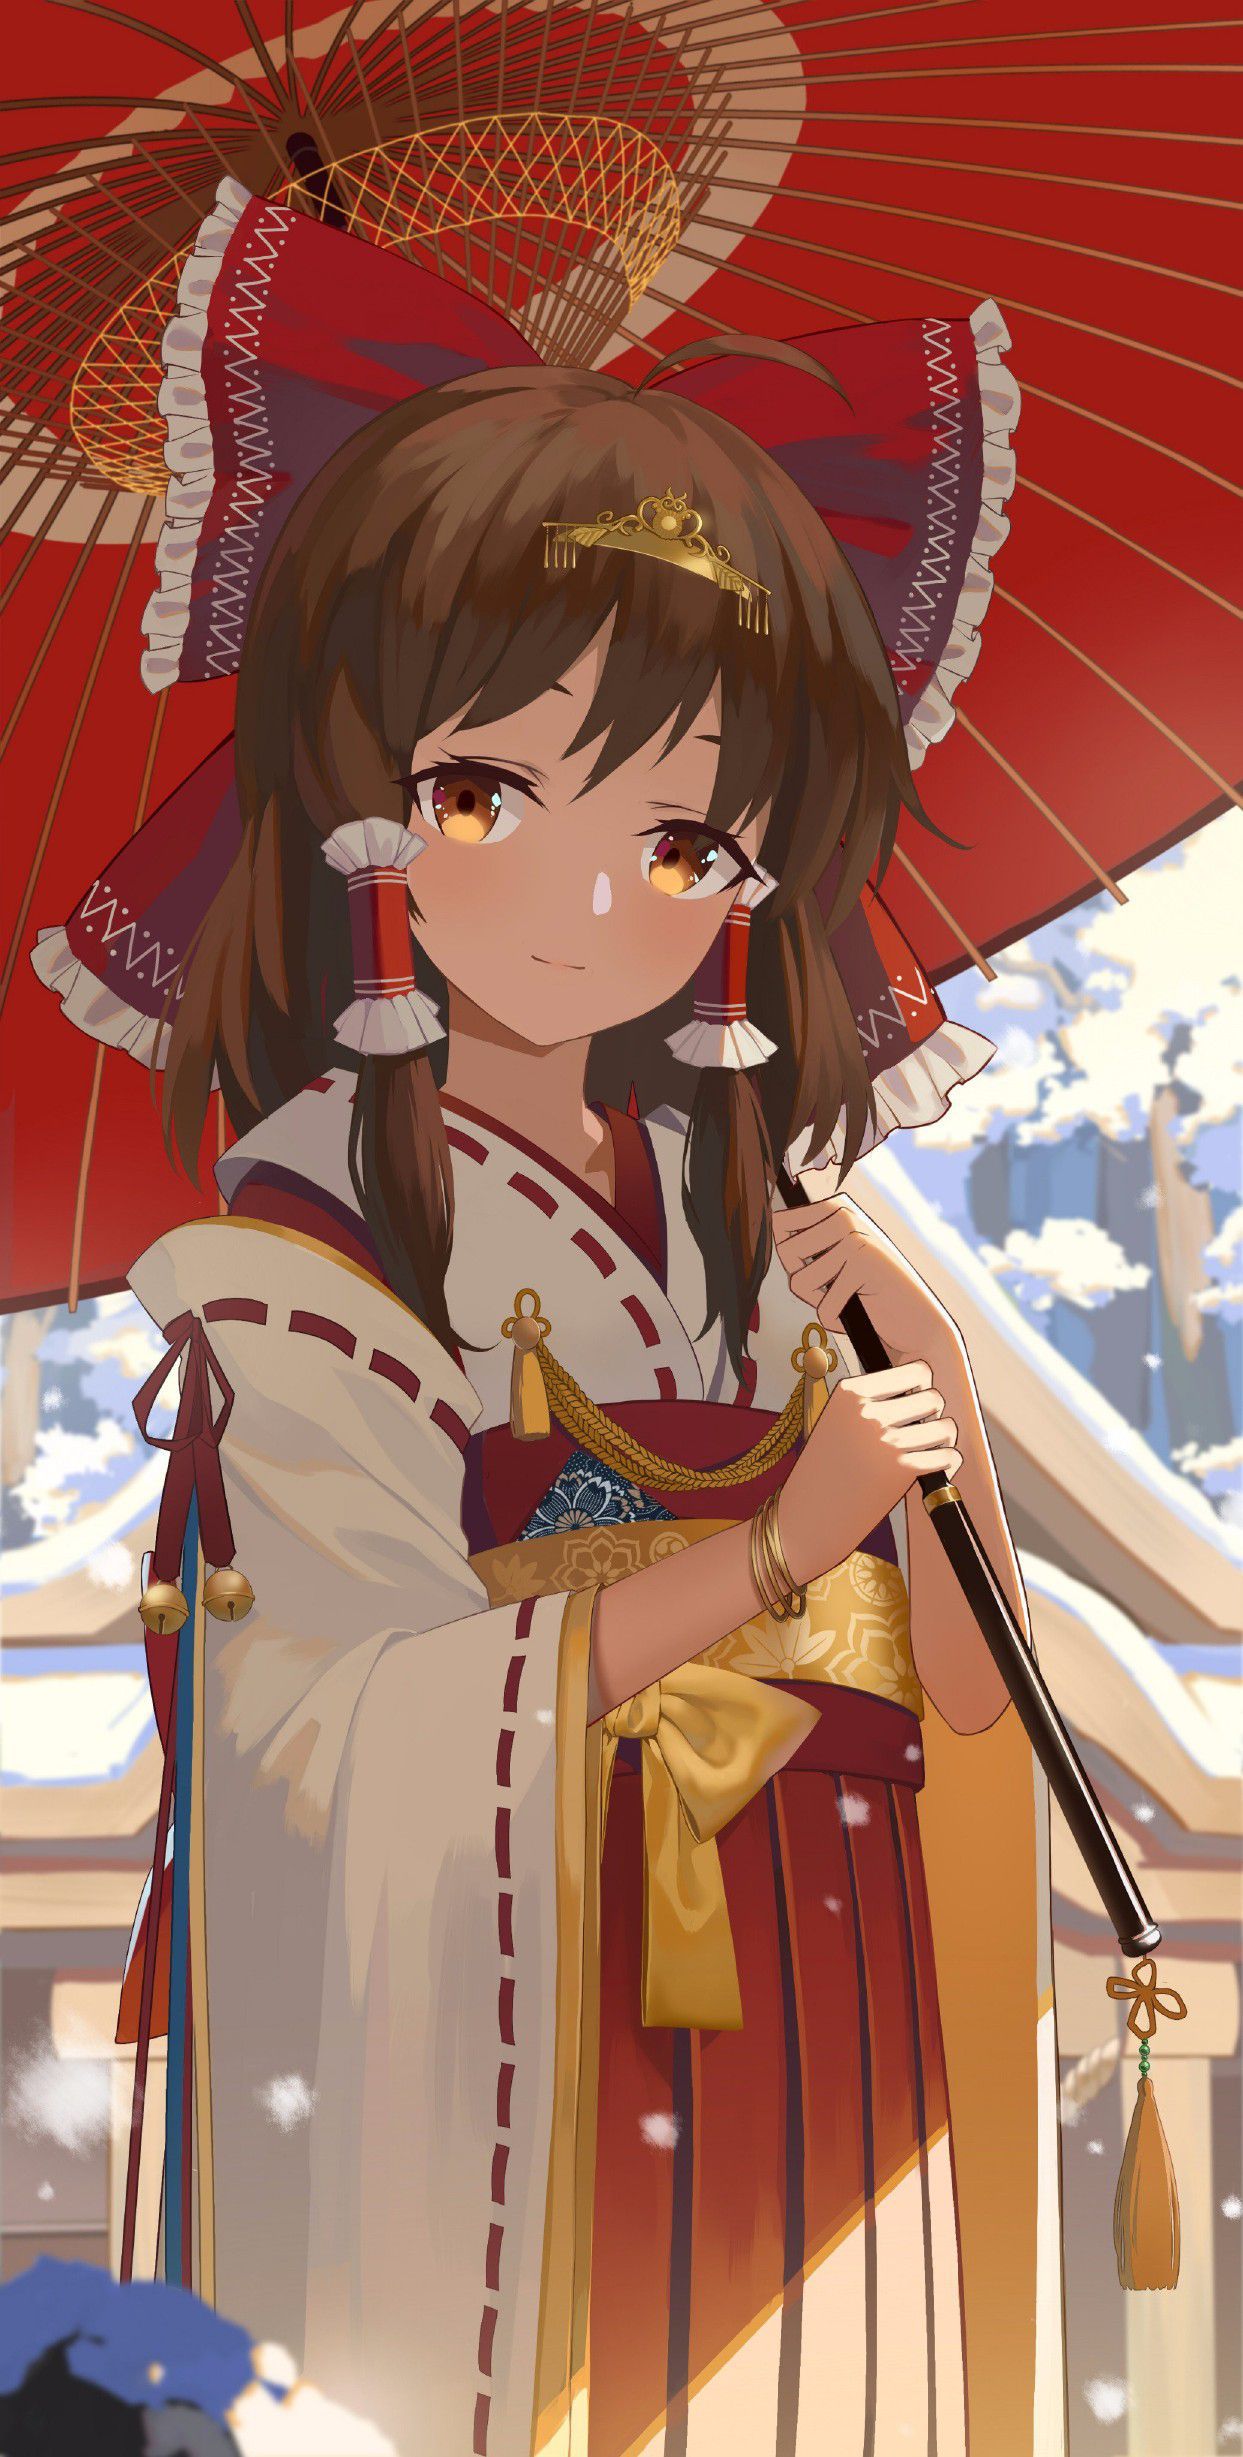 【Shrine Maiden】I have never seen it except New Year's Day, so I put an image of the shrine maiden Part 3 25